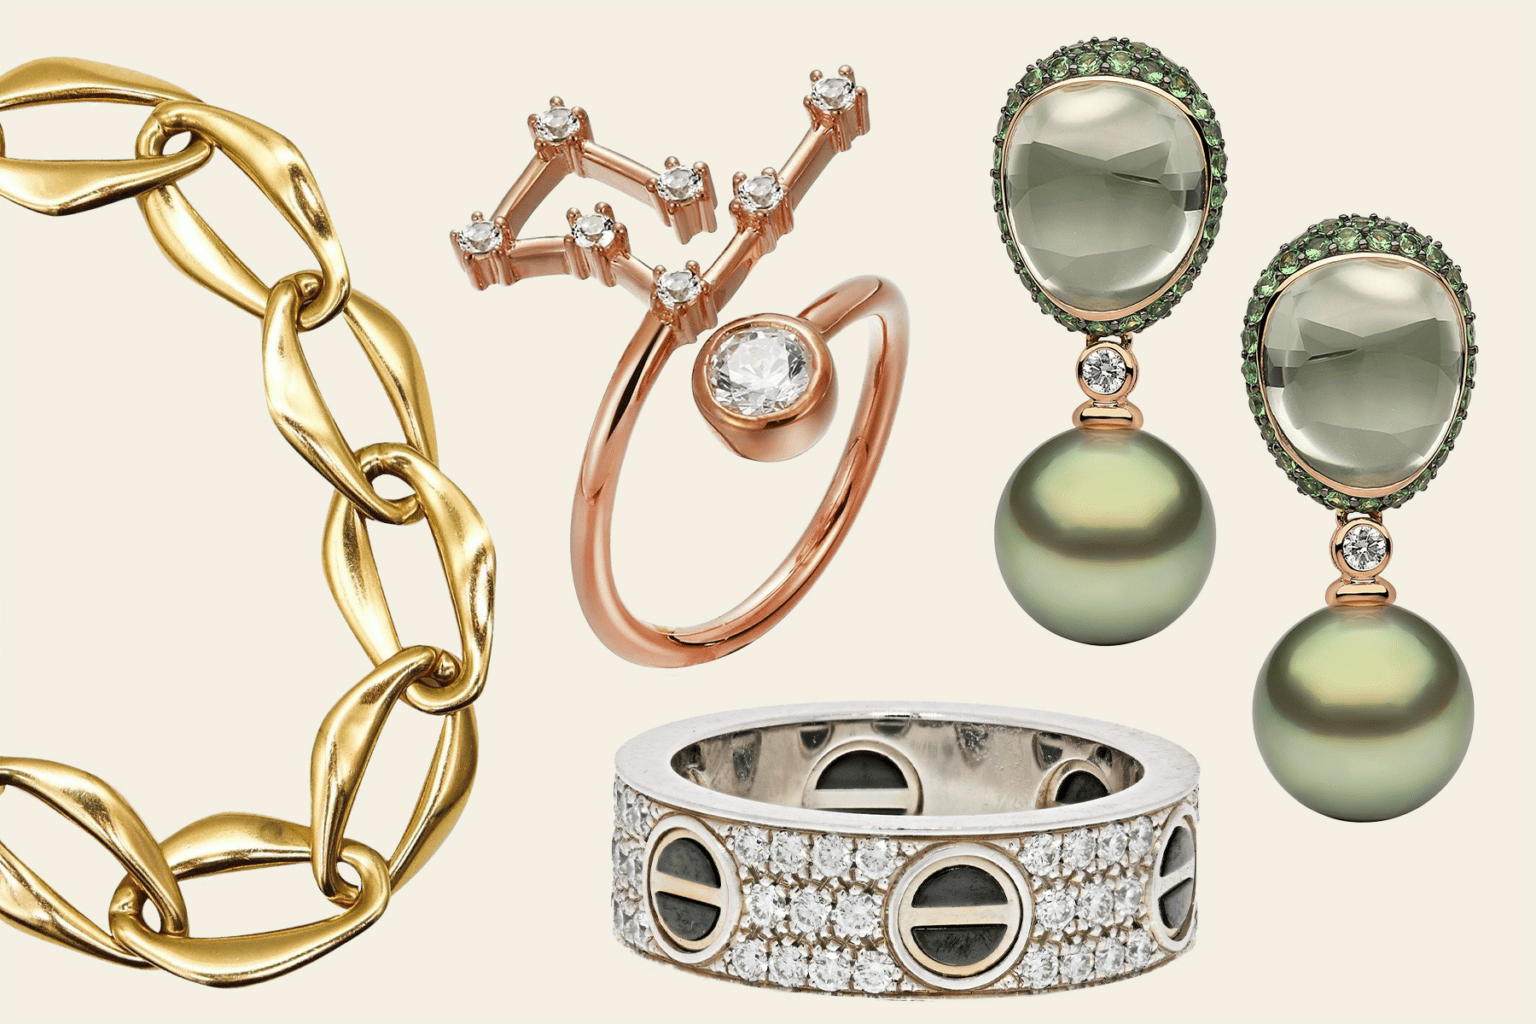 Gift Some Sparkle and Shine with These Holiday Jewelry Picks - The Study